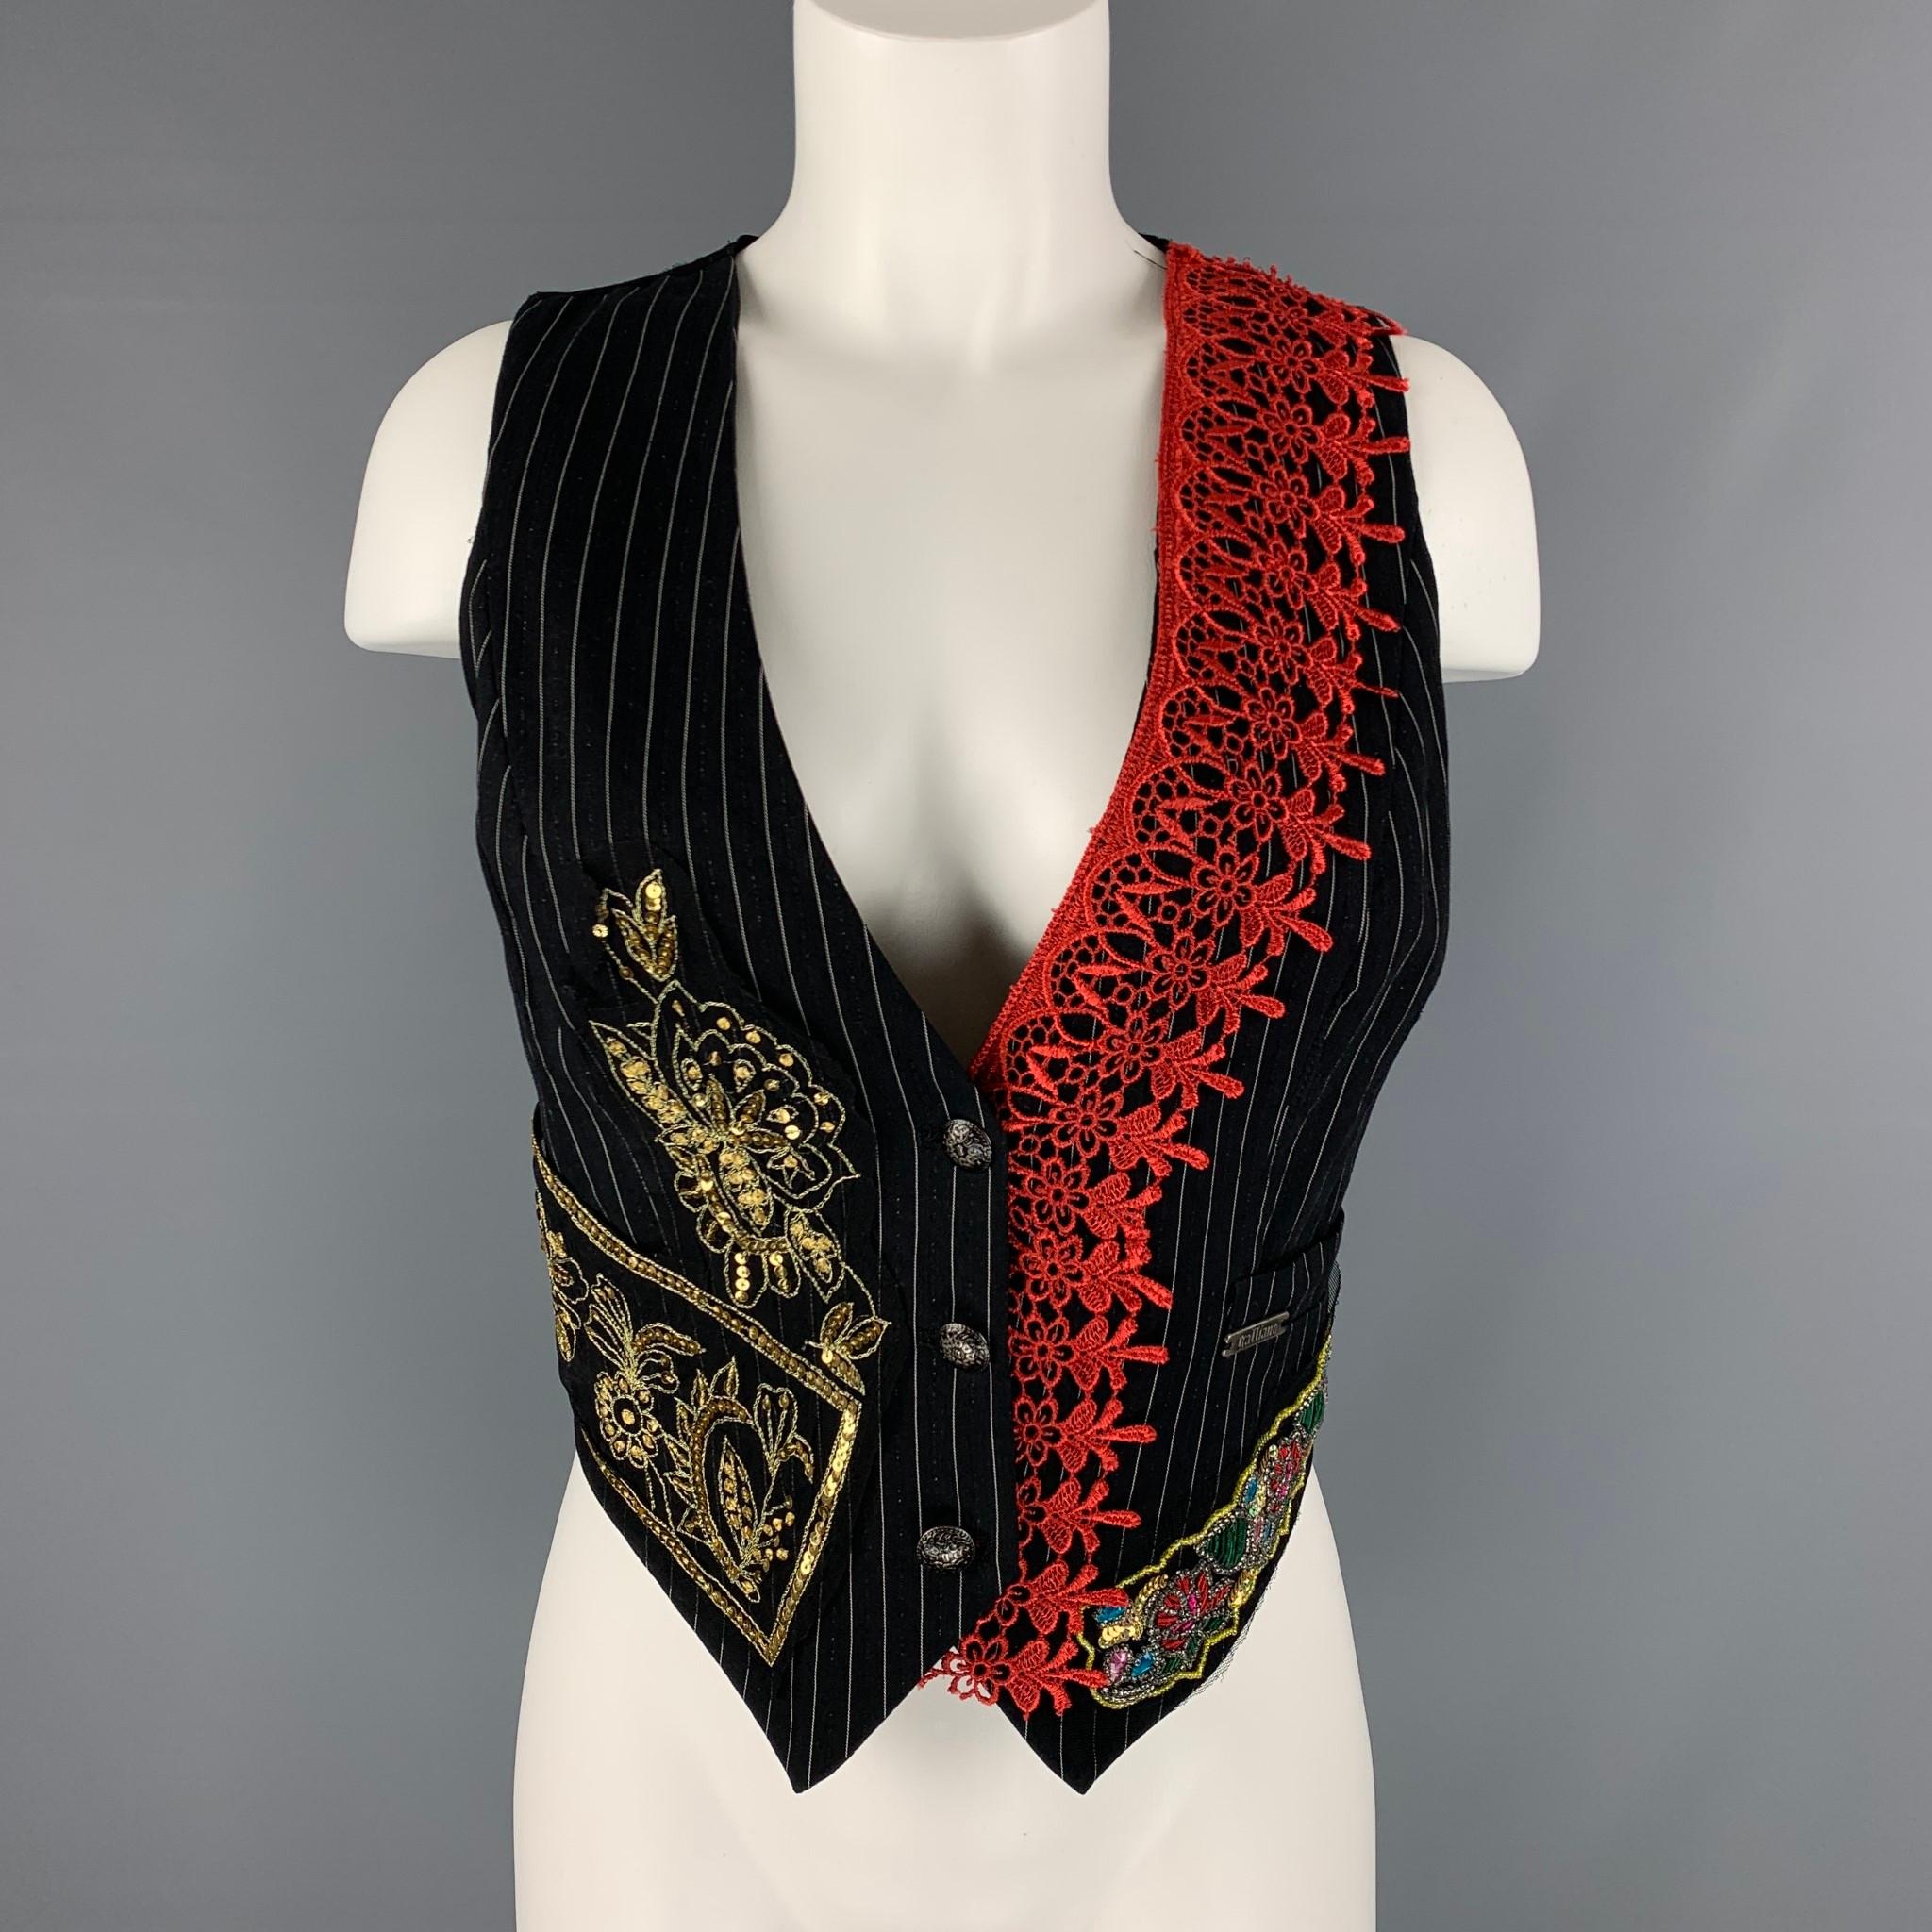 JOHN GALLIANO vest comes in black, red and gold pinstripe fabric with a v-neck, three buttons closure, beaded embroidery detail, newspaper print and lace detail and back belt.

Excellent Pre-Owned Condition.
Marked: no size